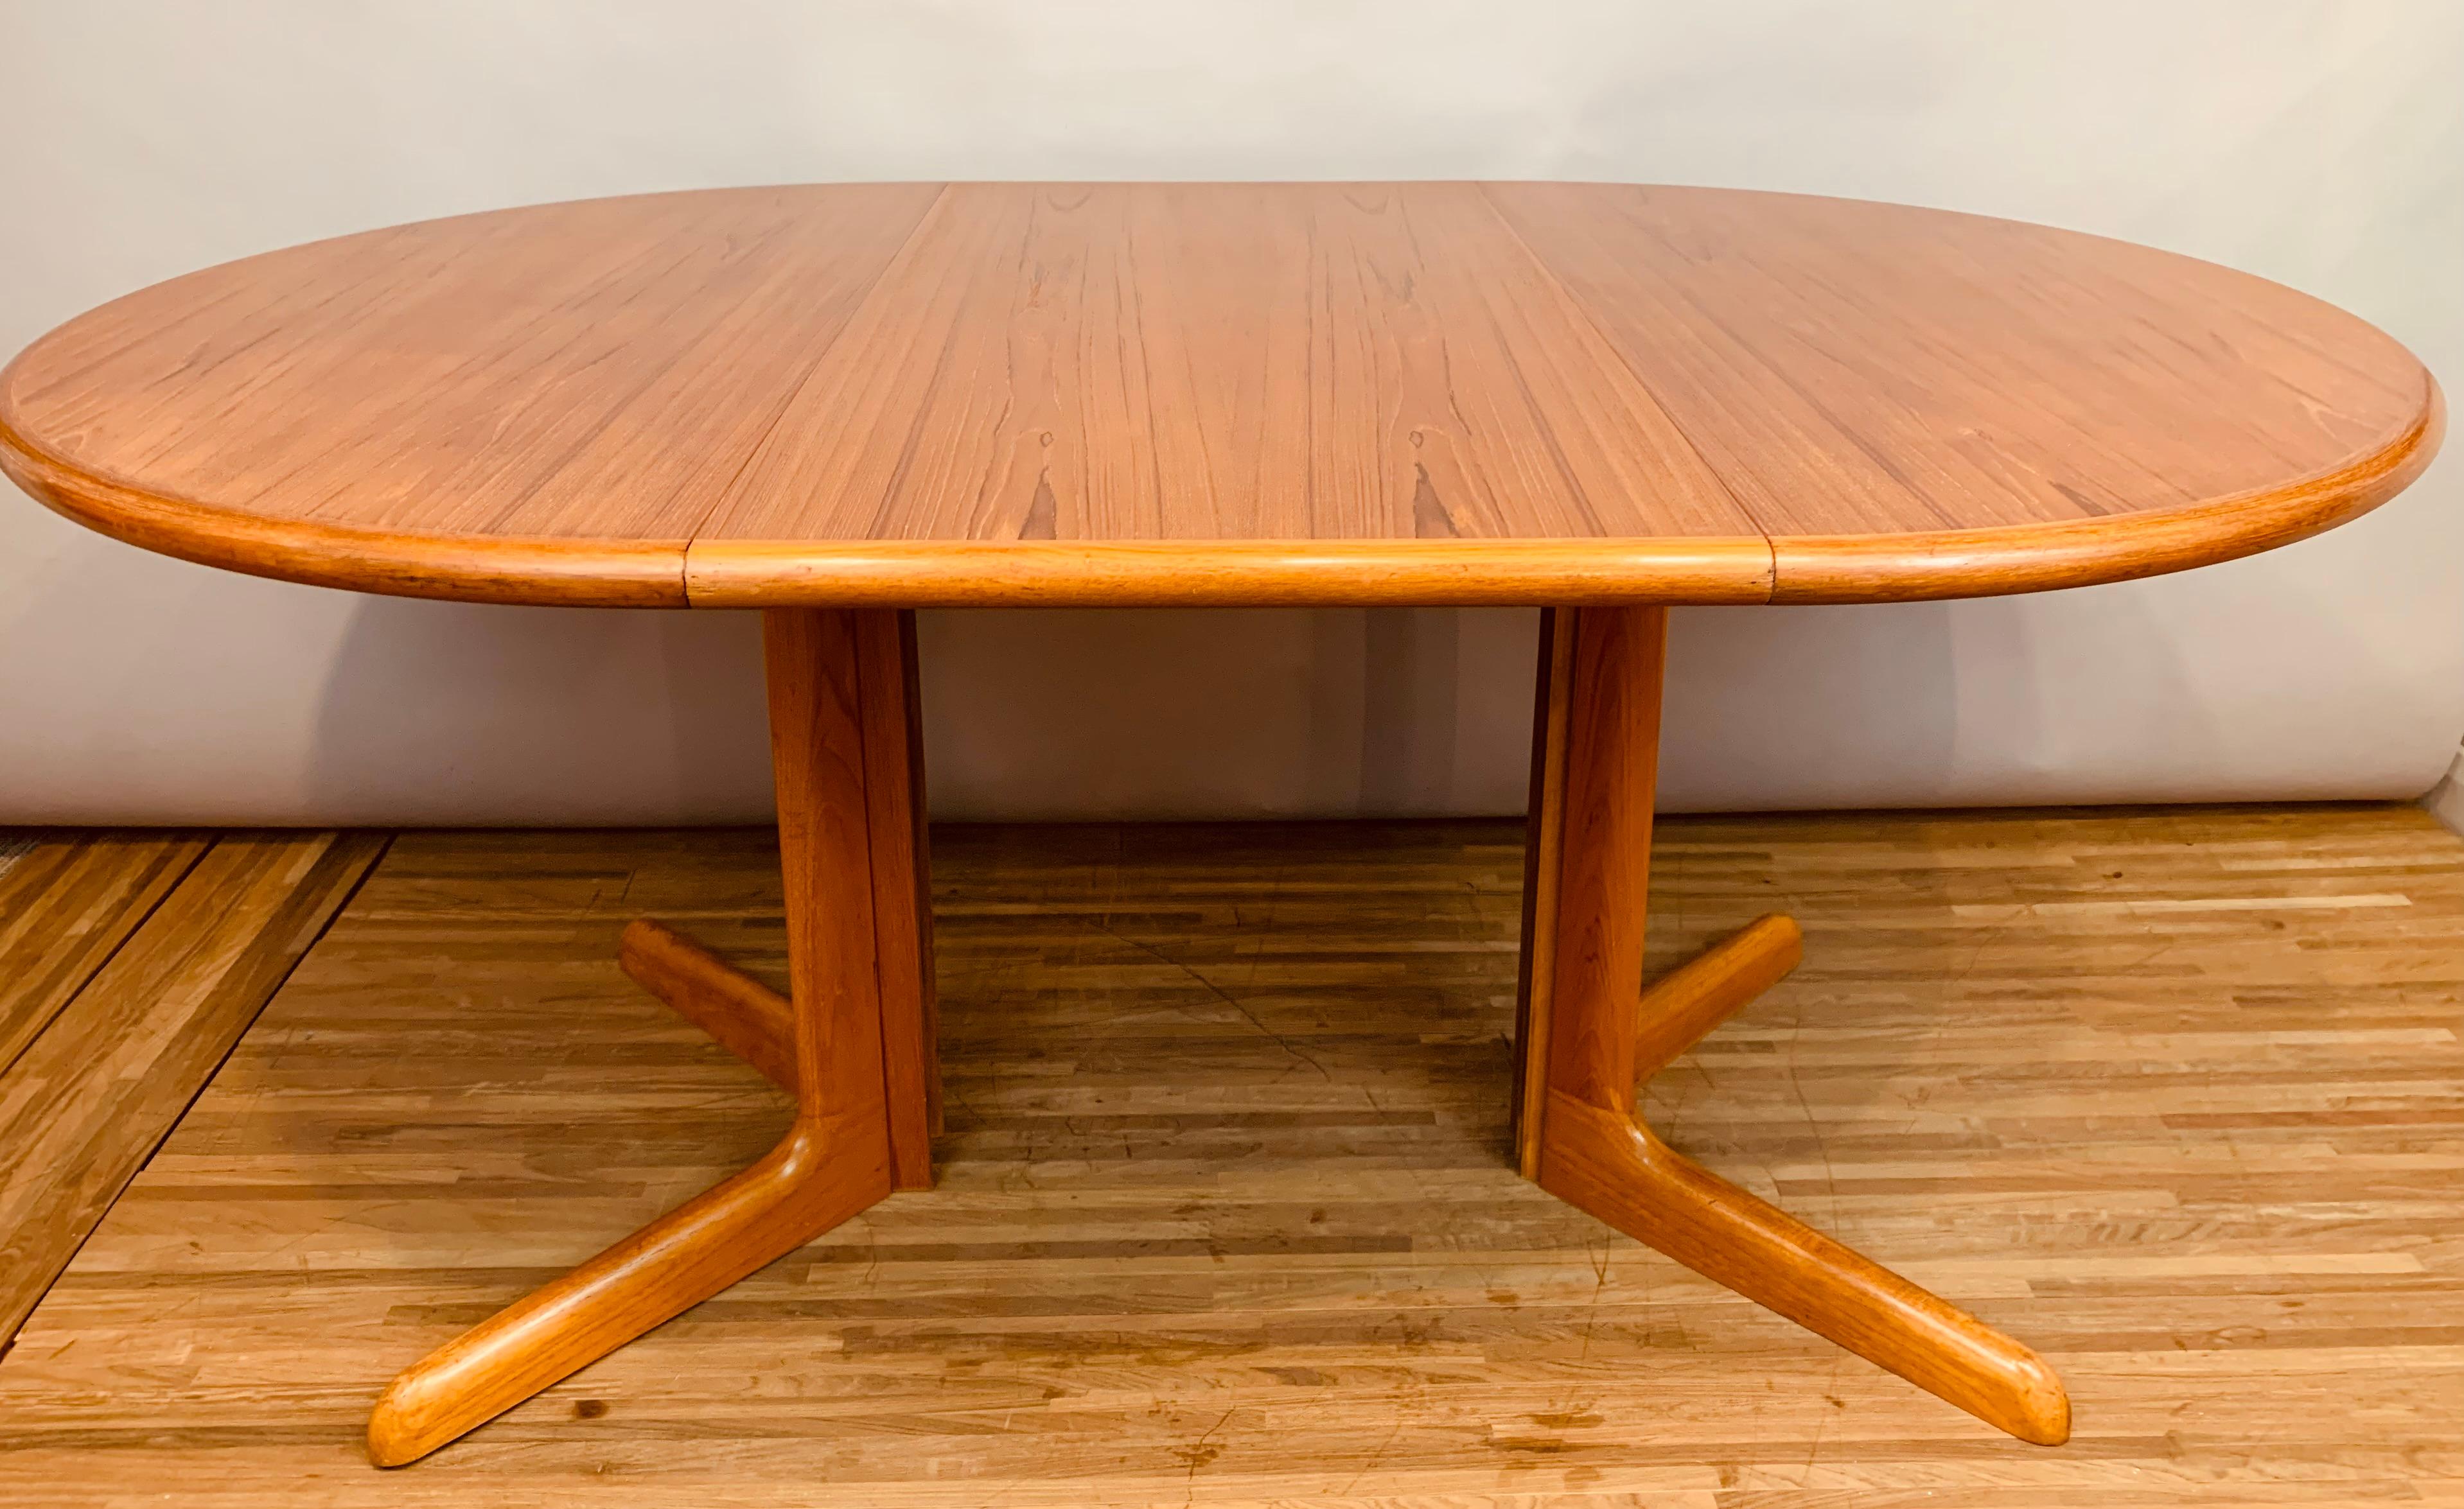 1960s Danish Gudme Møblefabrik Teak pedestal dining table with one single leaf measuring 49 cm wide. Attributed to the designer Niels Otto Møller. The original maker's label is still in tact on the underside of the table top - Gudme Møblefabrik A/S